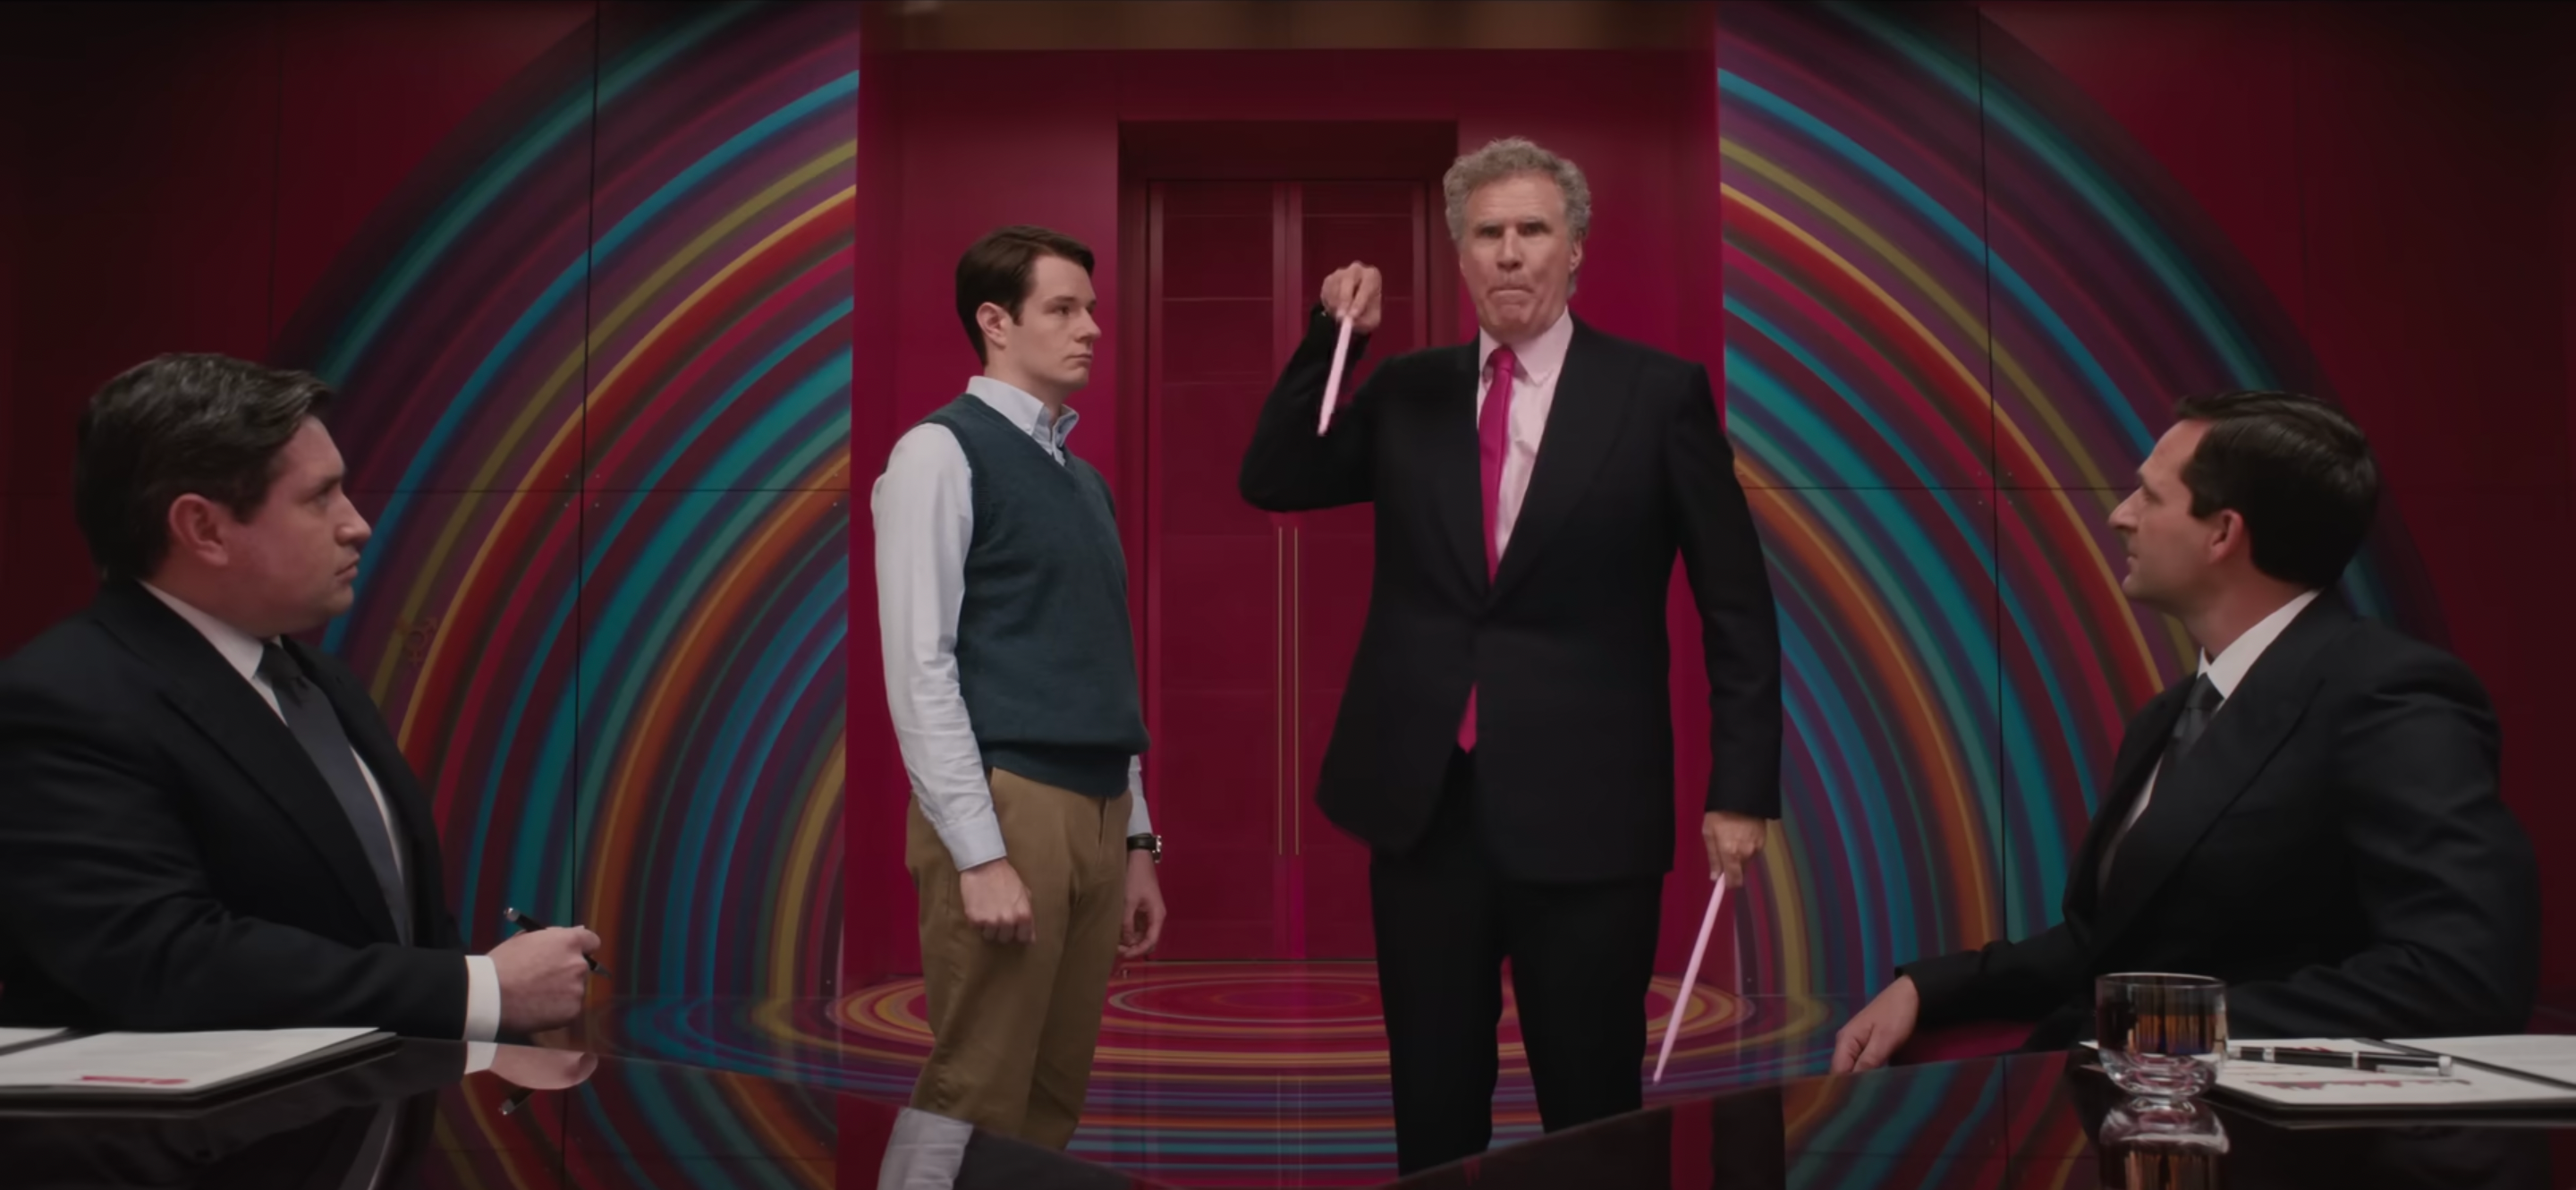 In the Mattel boardroom CEO Will Ferrell holds Barbie conductor's sticks while Connor Swindells looks at him